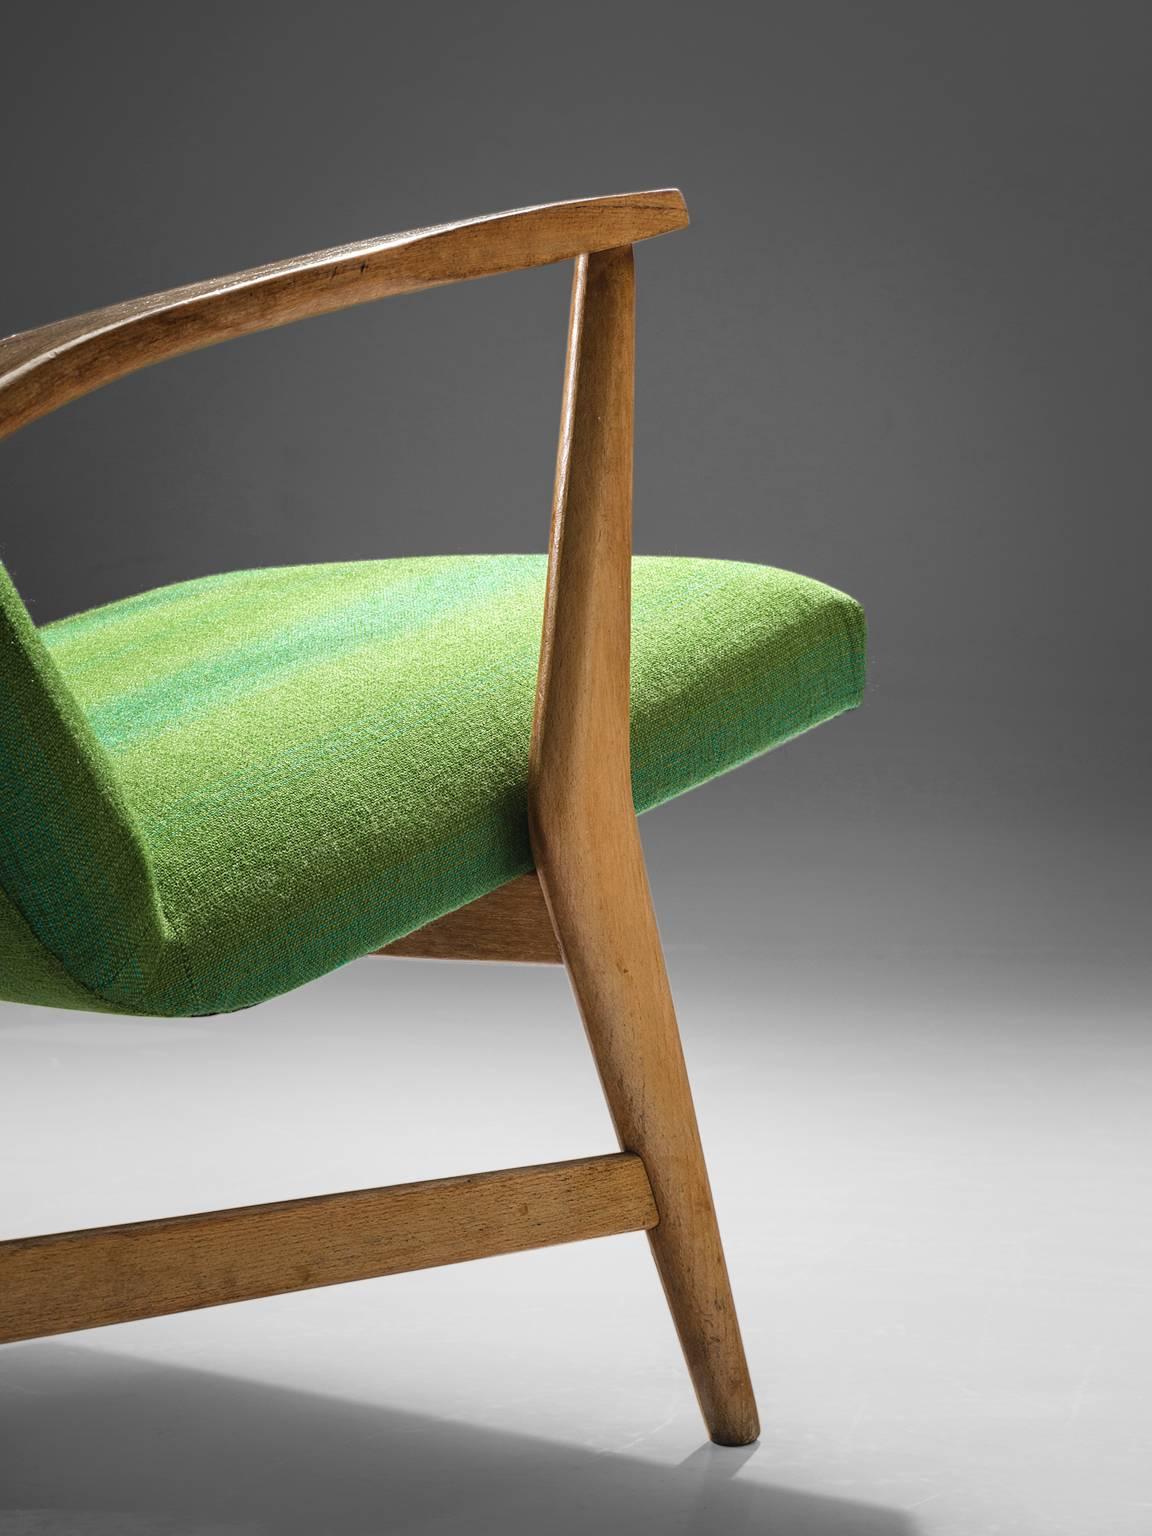 Mid-20th Century Oak Lounge Chairs in Green Upholstery